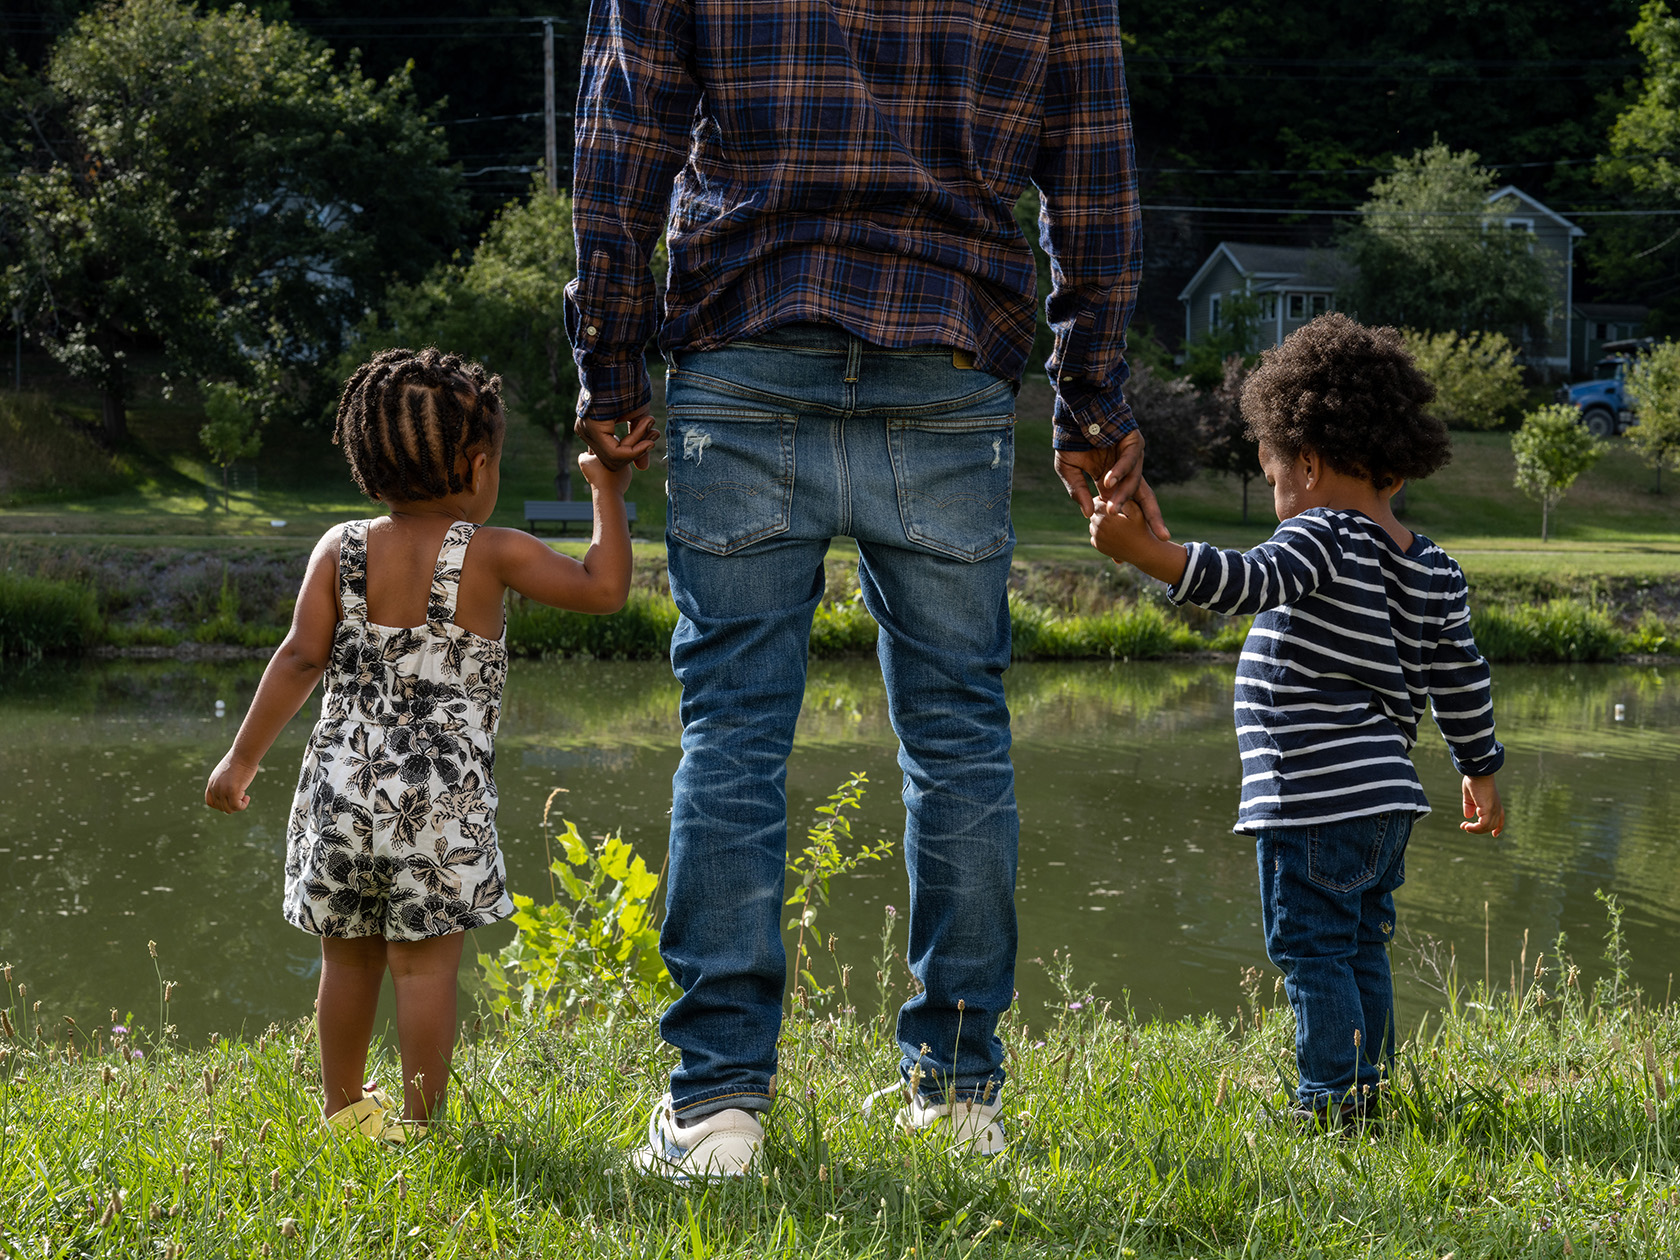 A Black man holds the hands of a Black boy and a Black girl next to a pond on a summer day